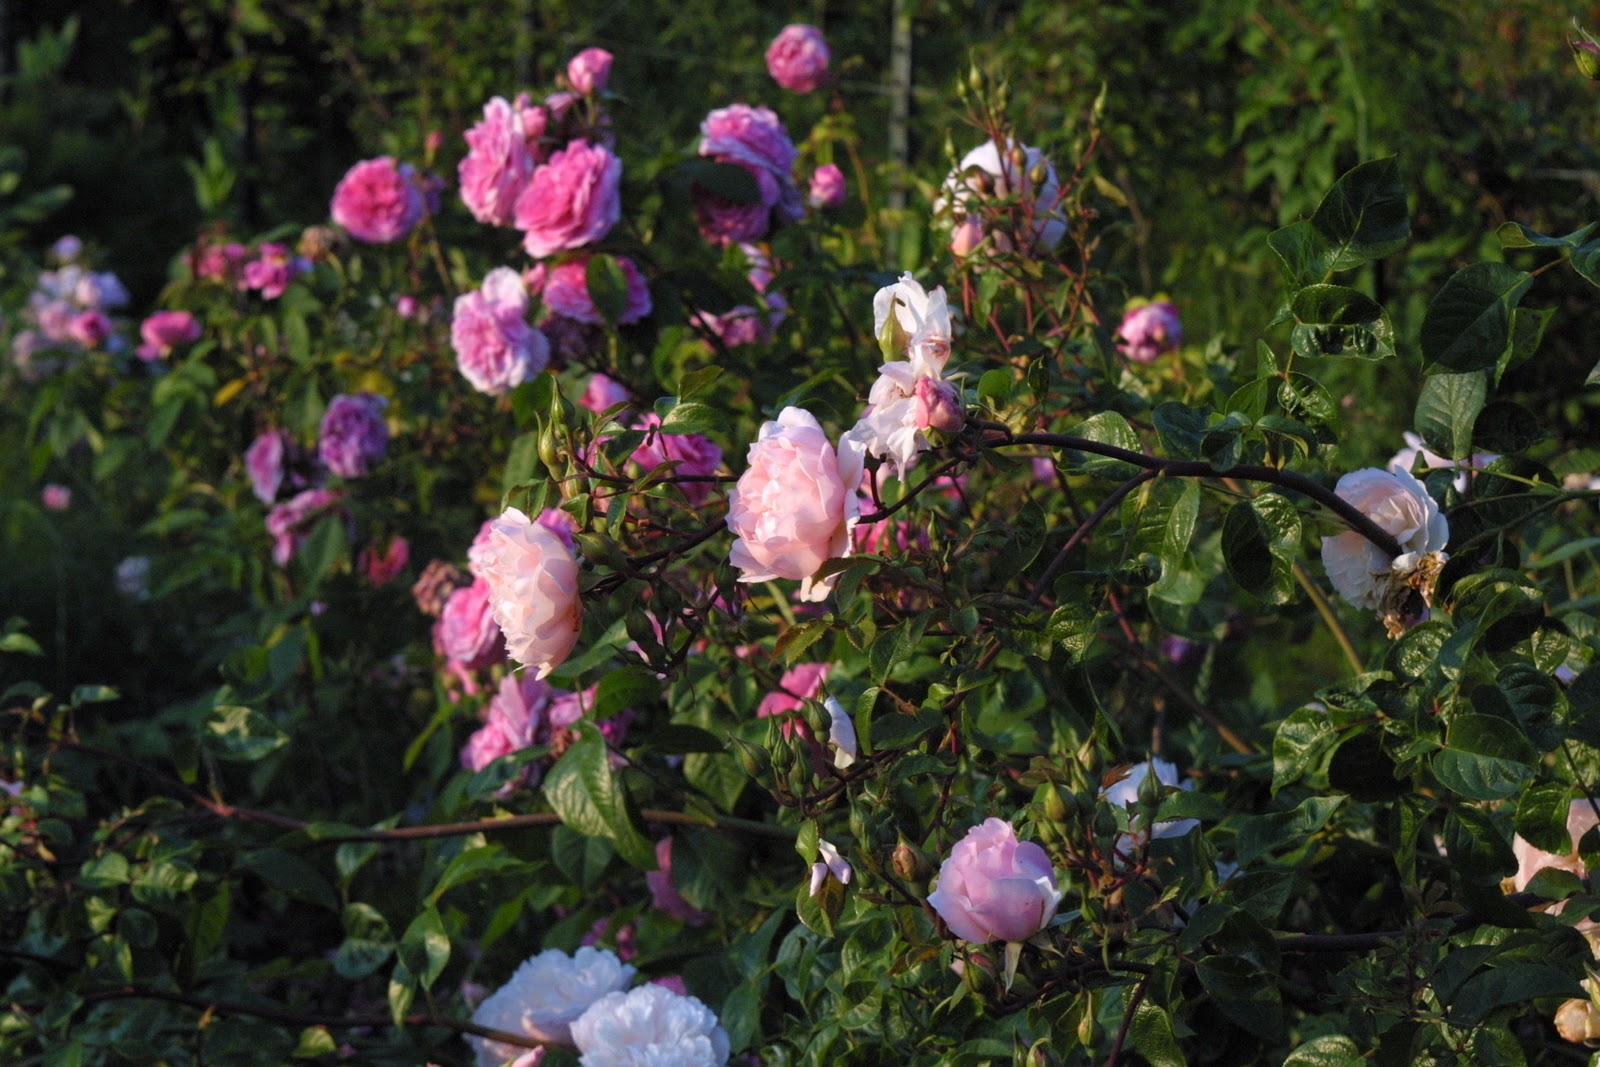 Roses growing in the field